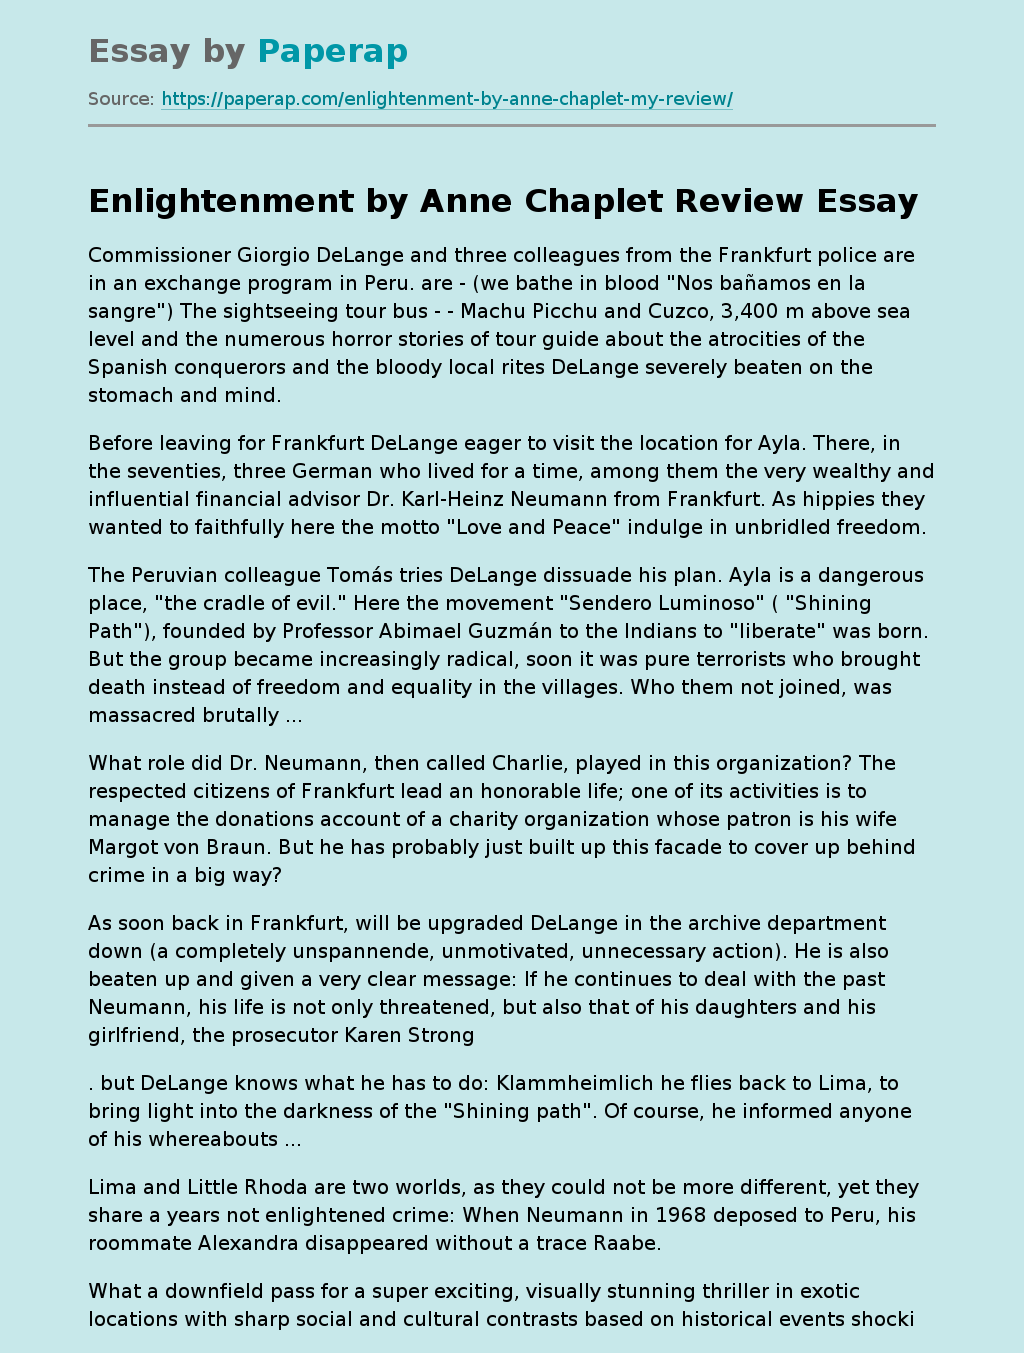 Enlightenment by Anne Chaplet Review